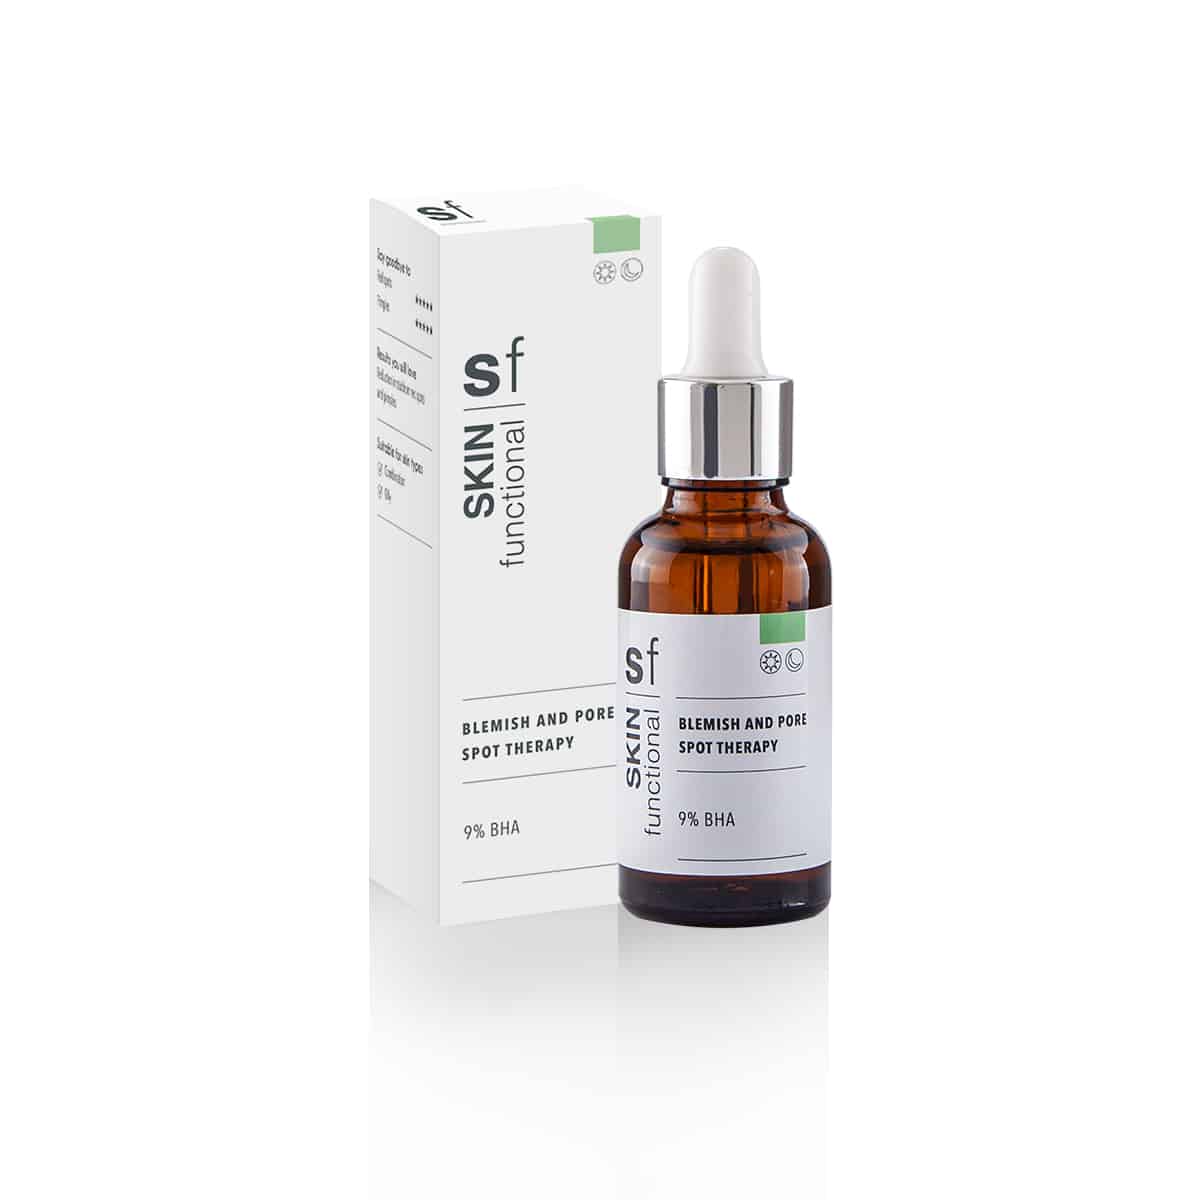 A bottle of SKIN Functional - 9% BHA - Blemish and Pore Spot Therapy on a white background.